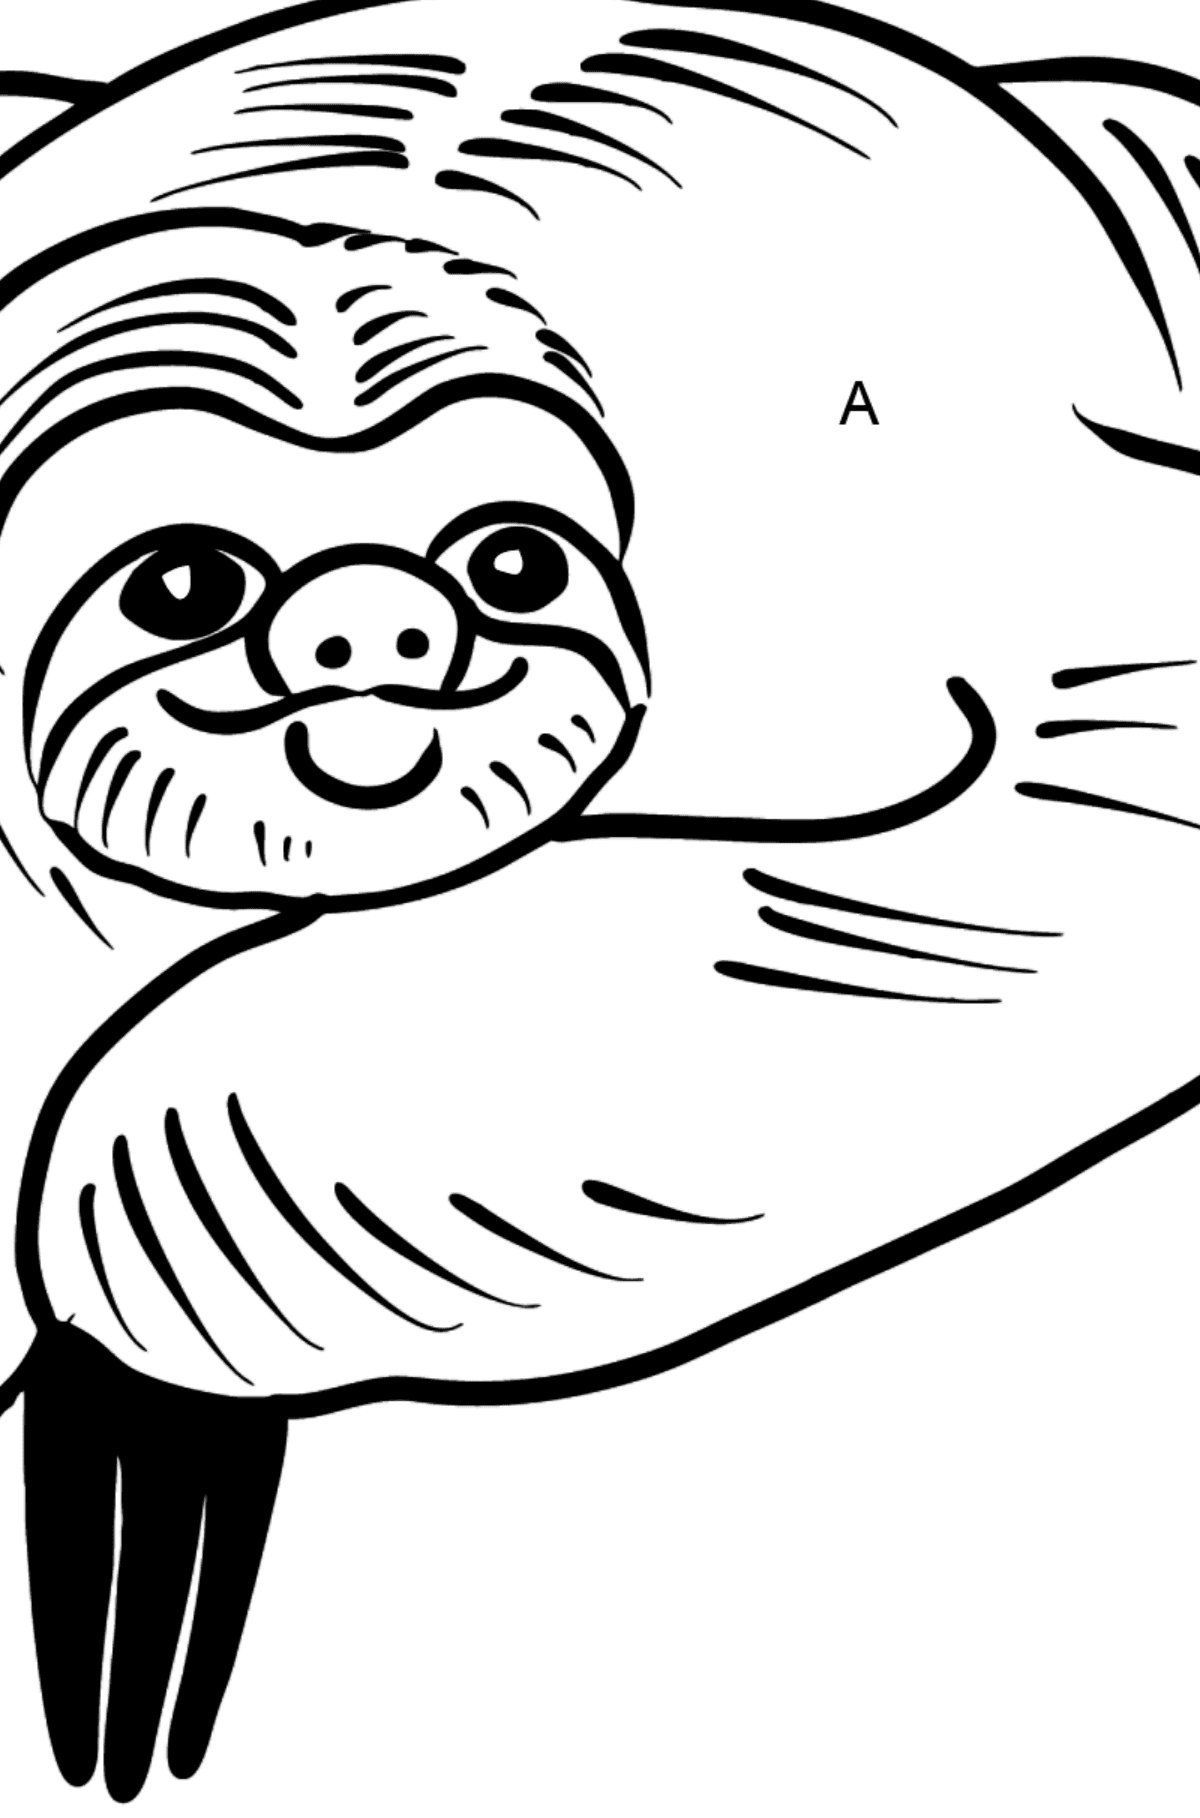 Sloth coloring page - Coloring by Letters for Kids